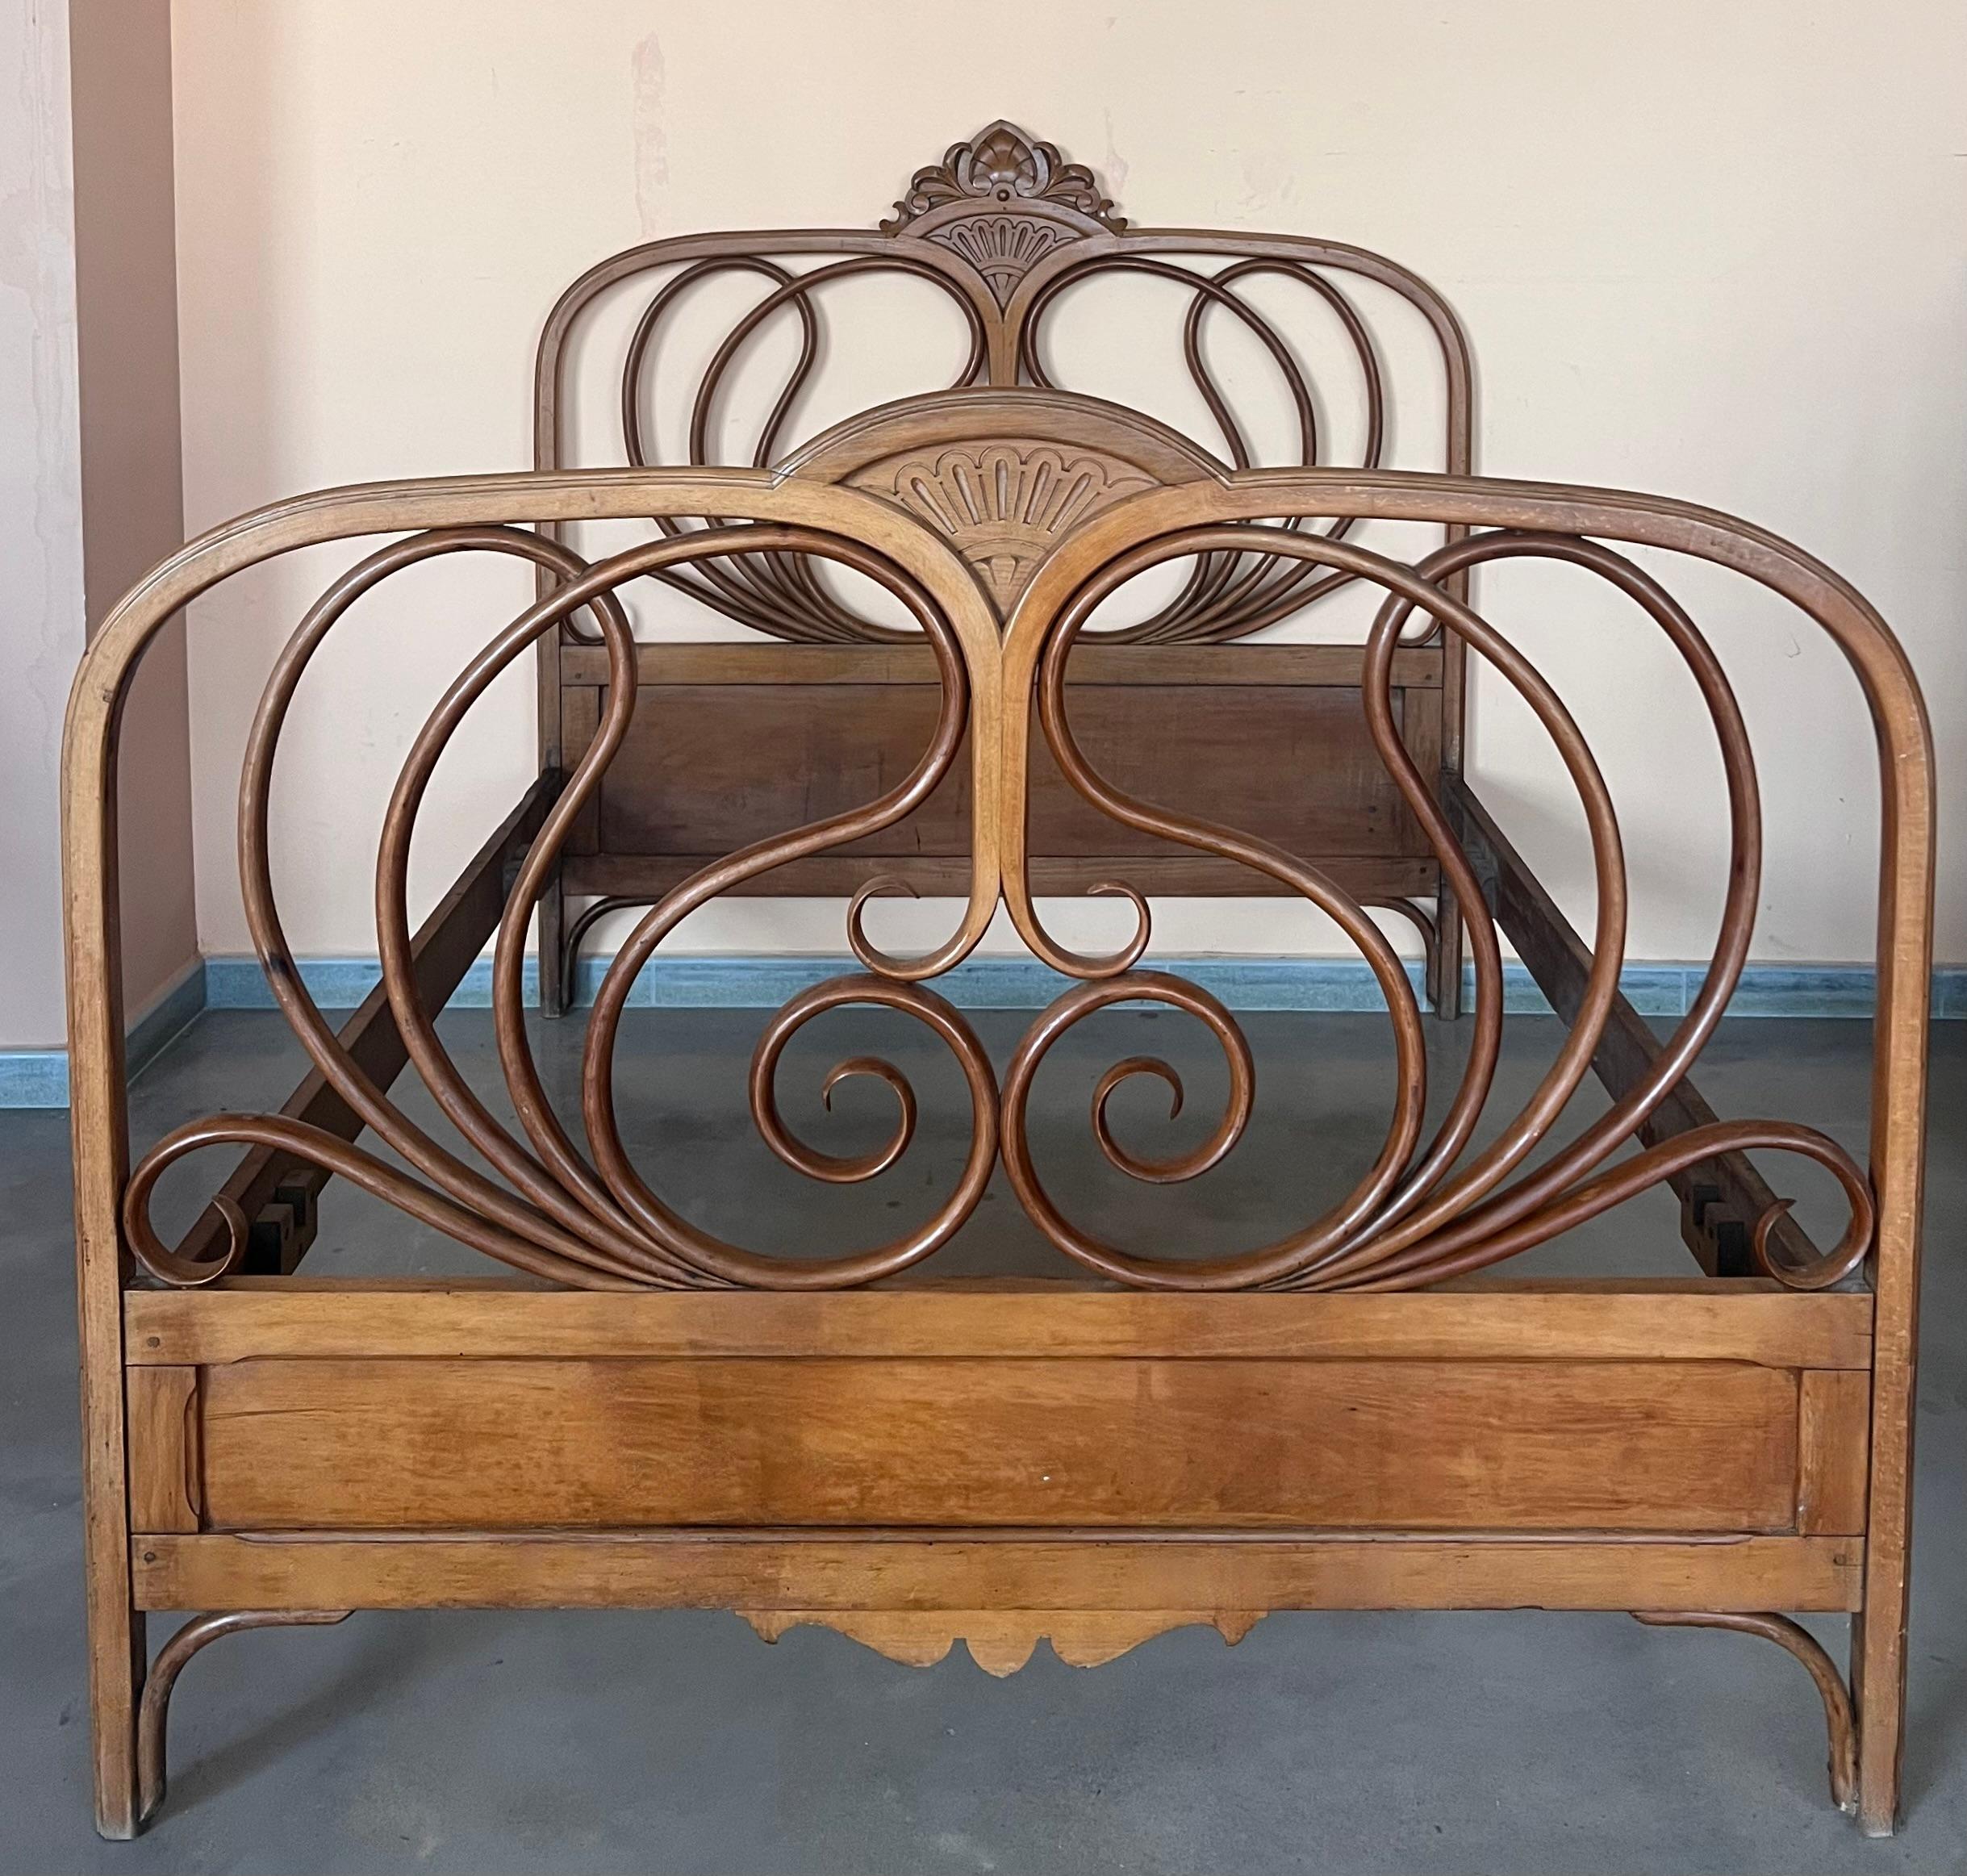 1900s bed